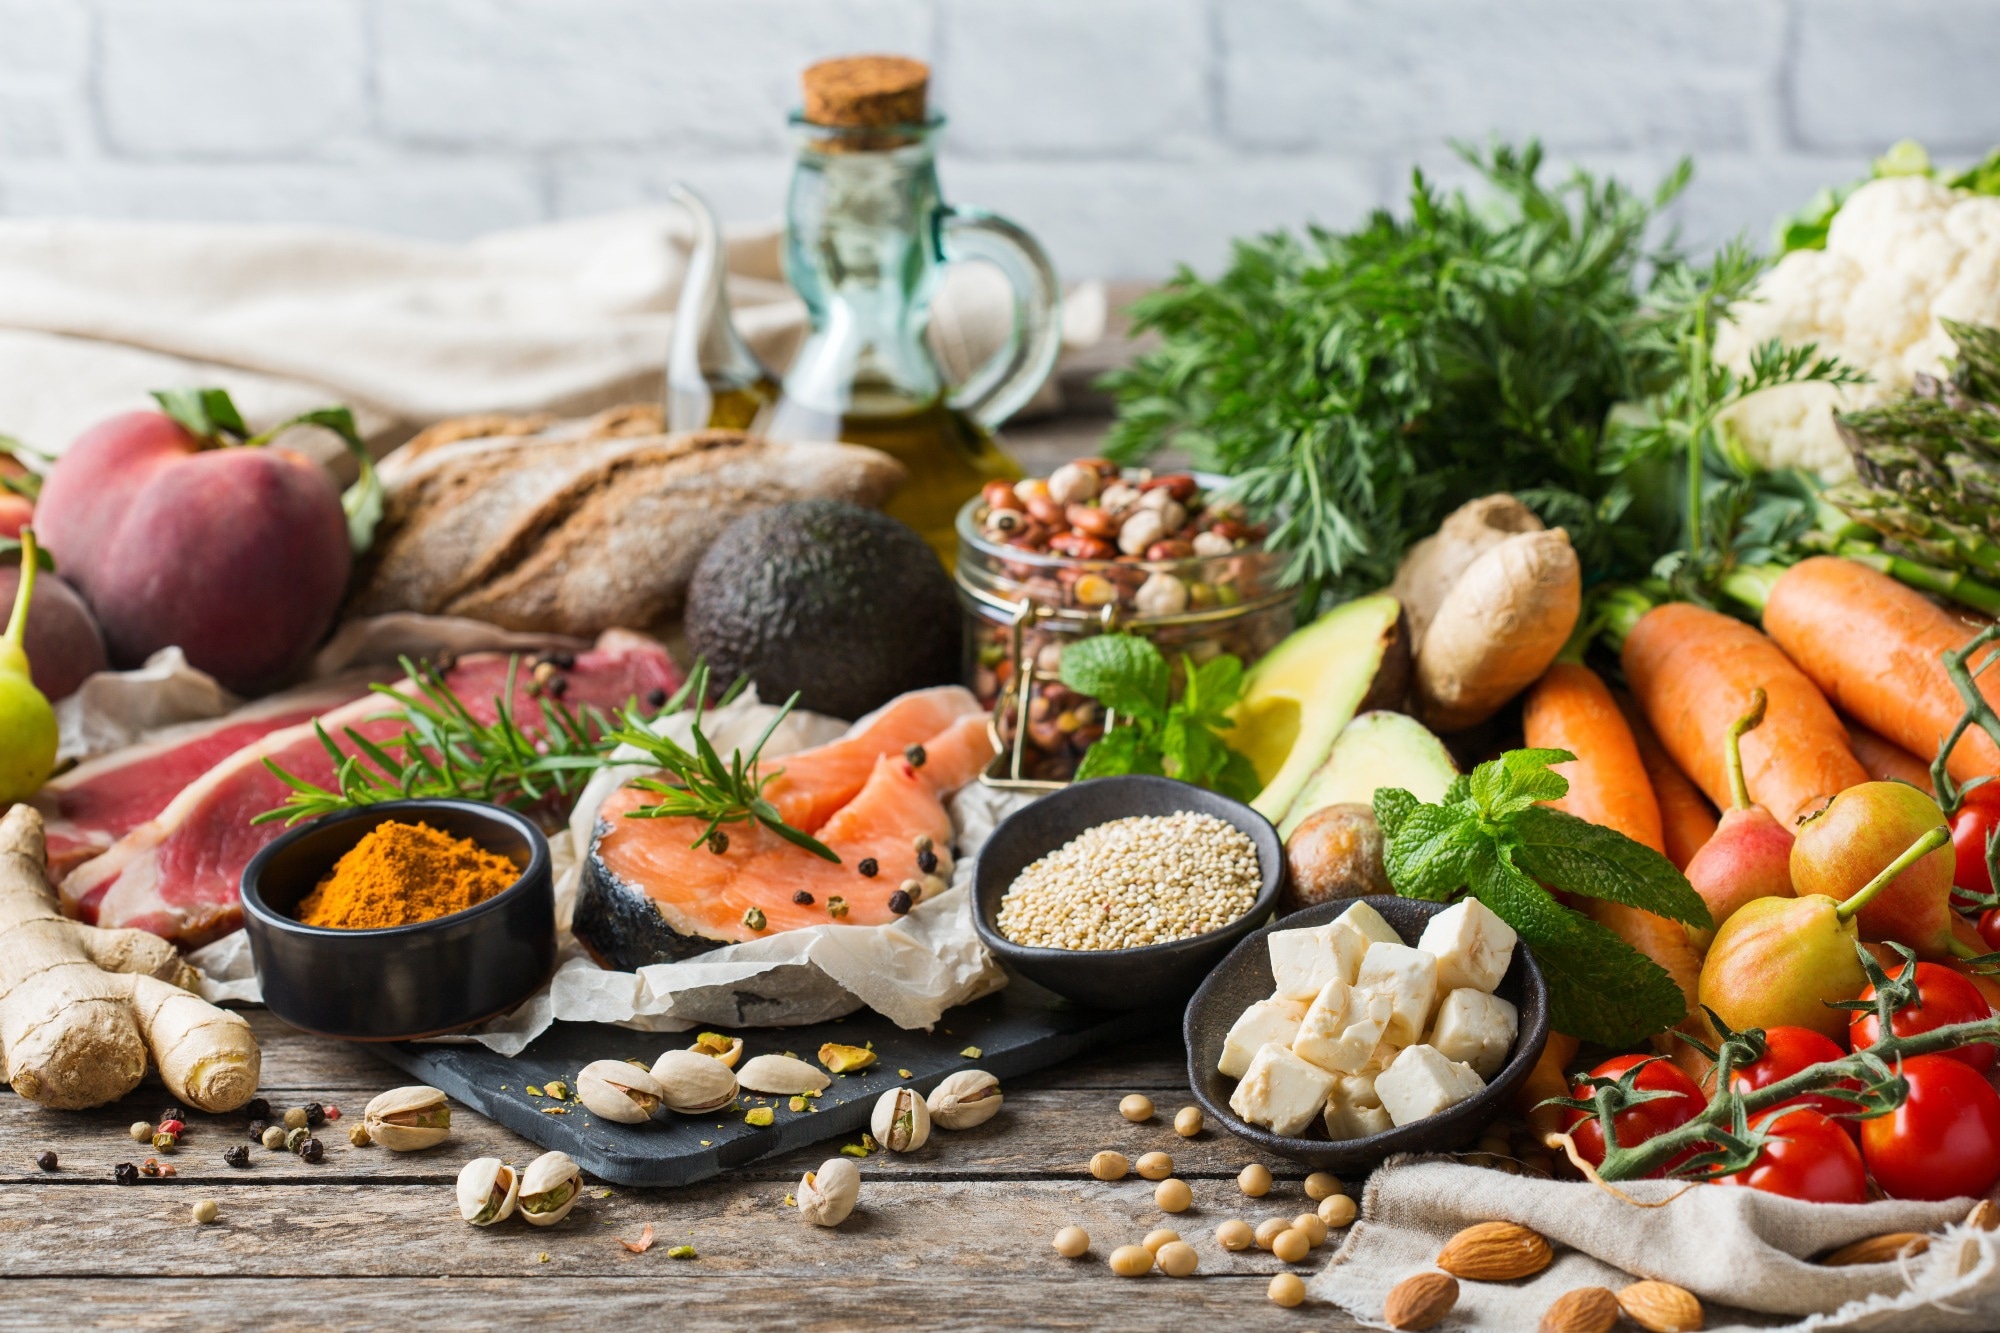 Study: Diet quality and nutrient density in pregnant women according to adherence to Mediterranean diet. Image Credit: AntoninaVlasova/Shutterstock.com